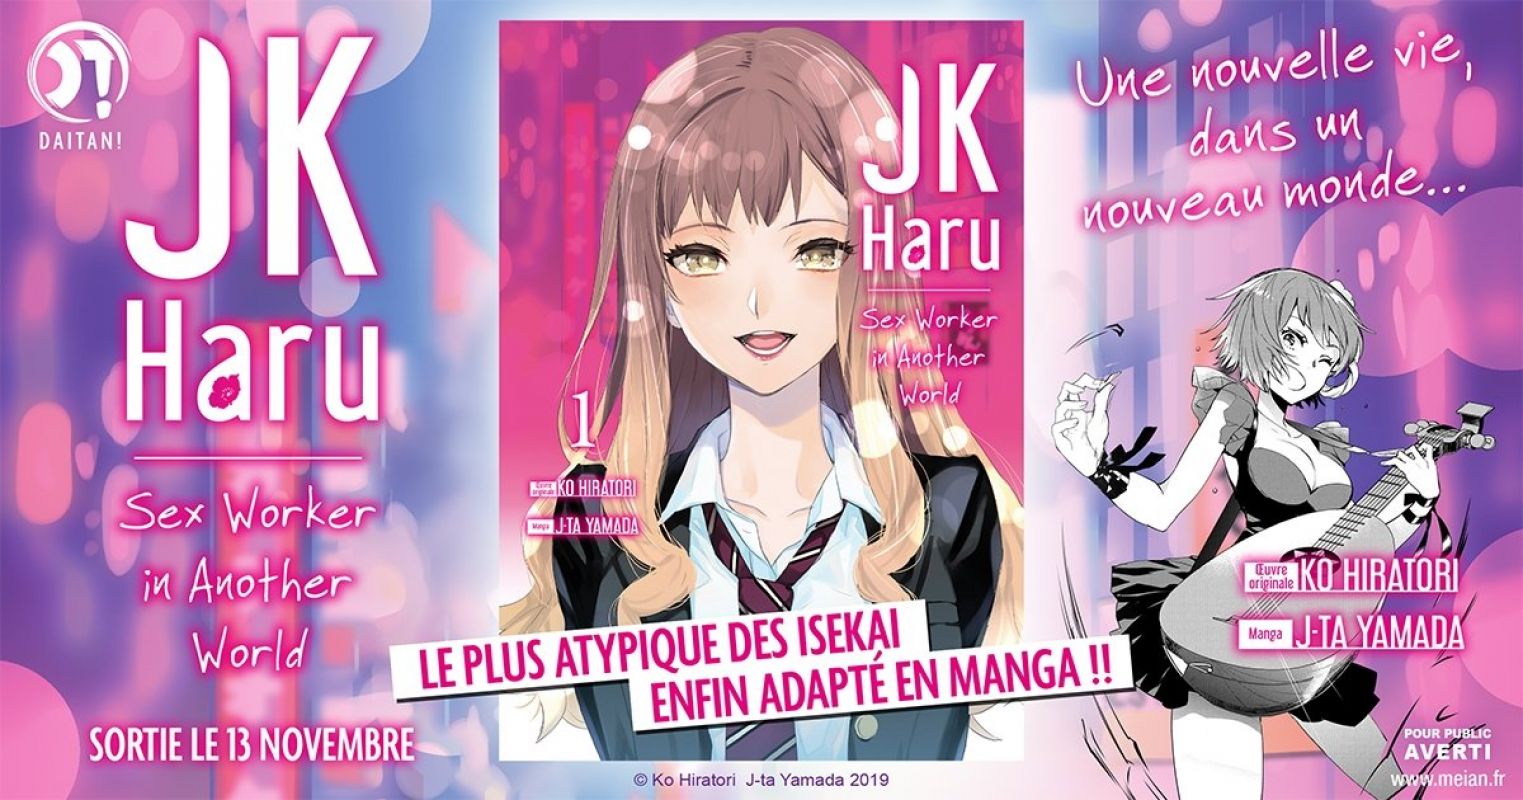 JK Haru is a Sex Worker in Another World: Summer by Ko 